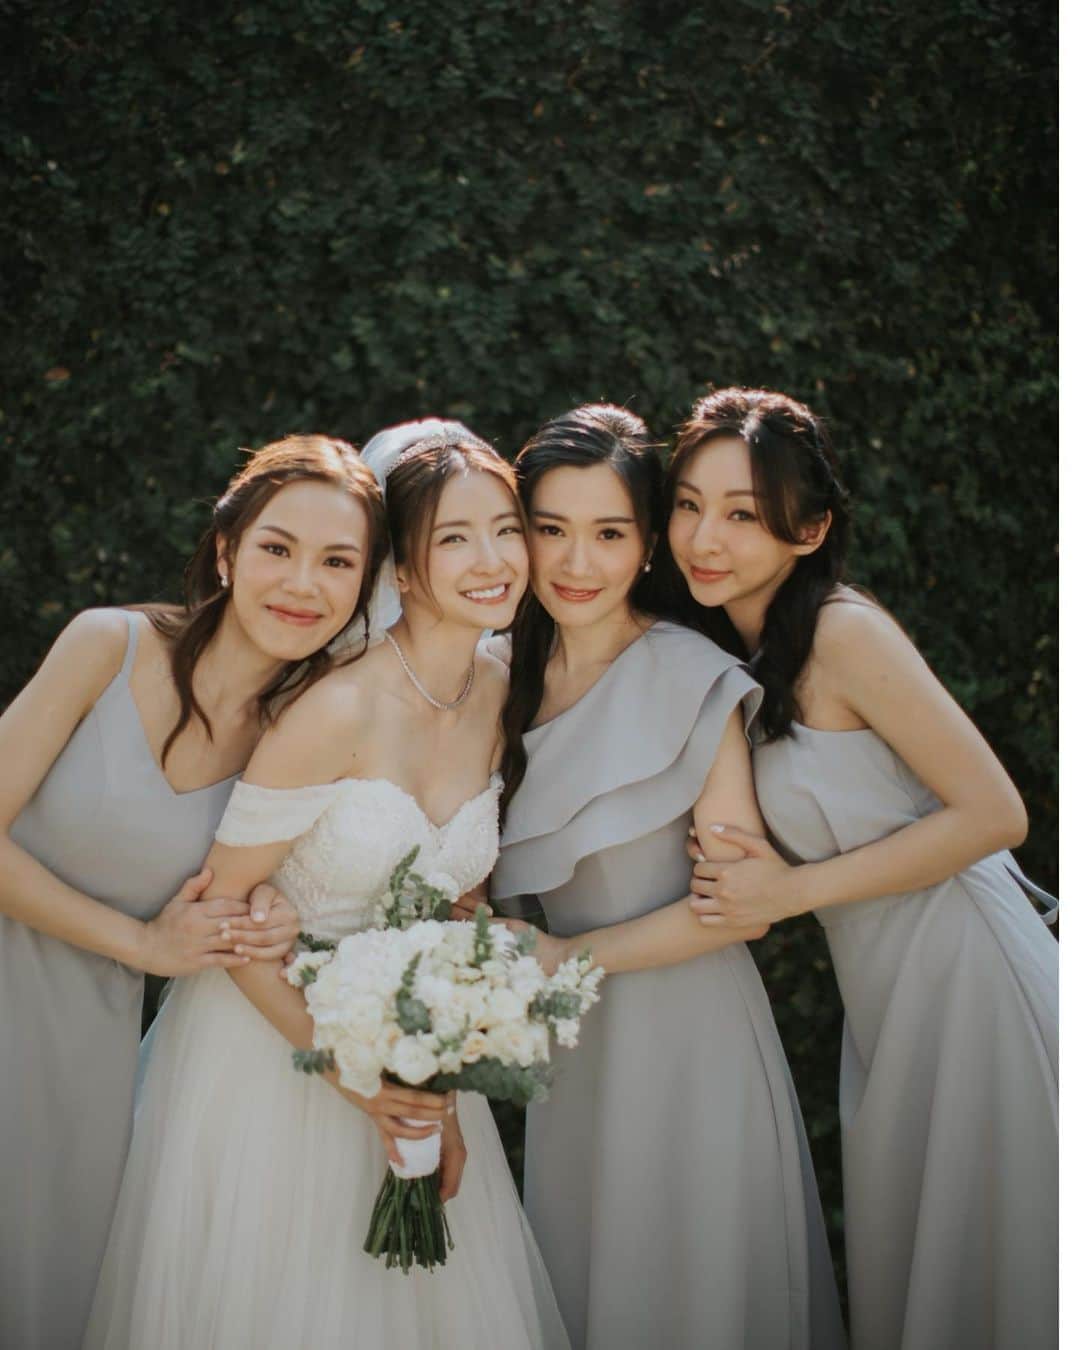 Giann Chanのインスタグラム：「#Teambride 💫  1 sagittarius + 2 Libras = Best bridemaids  I have known these girls for over 10 years, and we've never argued because they are kind, funny, and beautiful at heart. I'm grateful they've been with me through the ups and downs of the past. Here's to 10,12,14 years of friendship and the promise of many more to come! Bridesmaids brushed by @florencia.fanny   #Bridesmaid #bff #Uluwatu #Bali #girlsgirlsgirls #weddinginspiration」